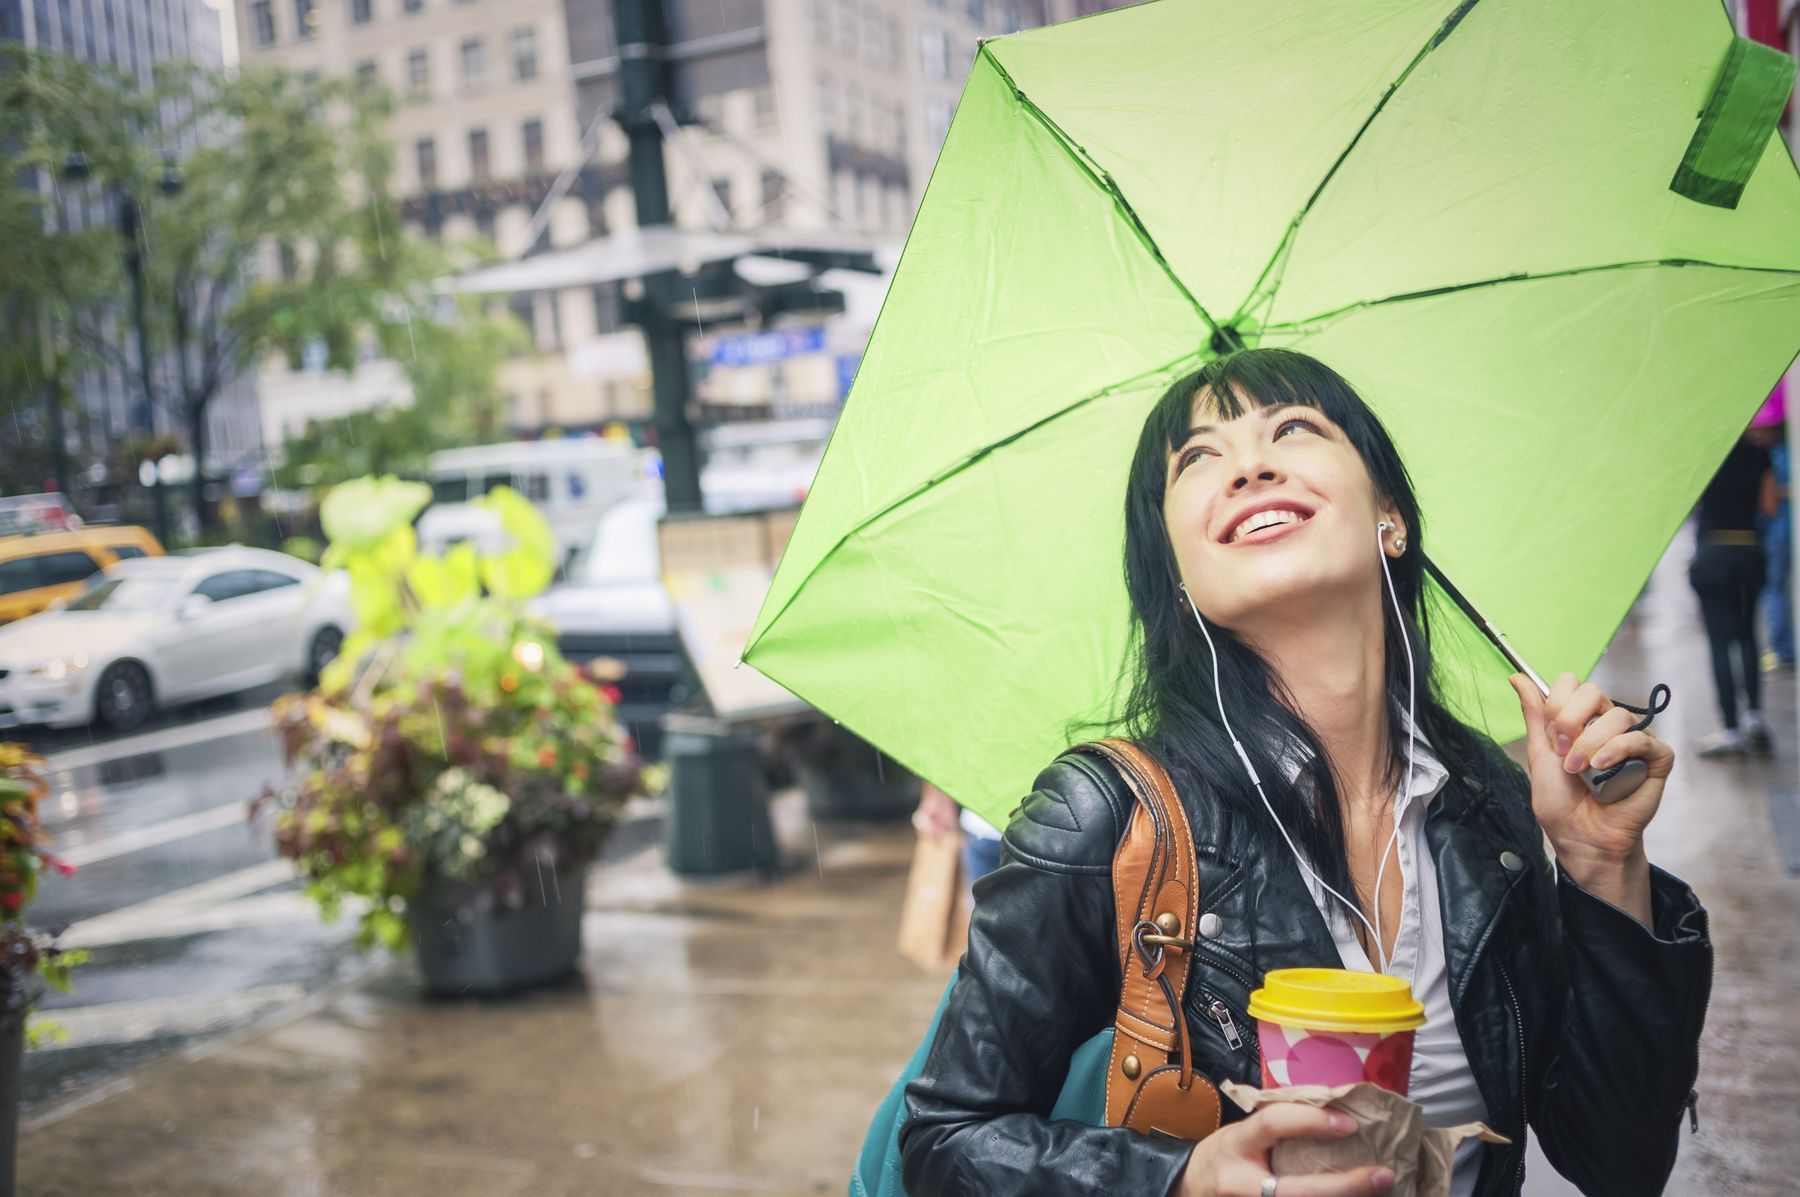 Woman smiling holding a lime green umbrella